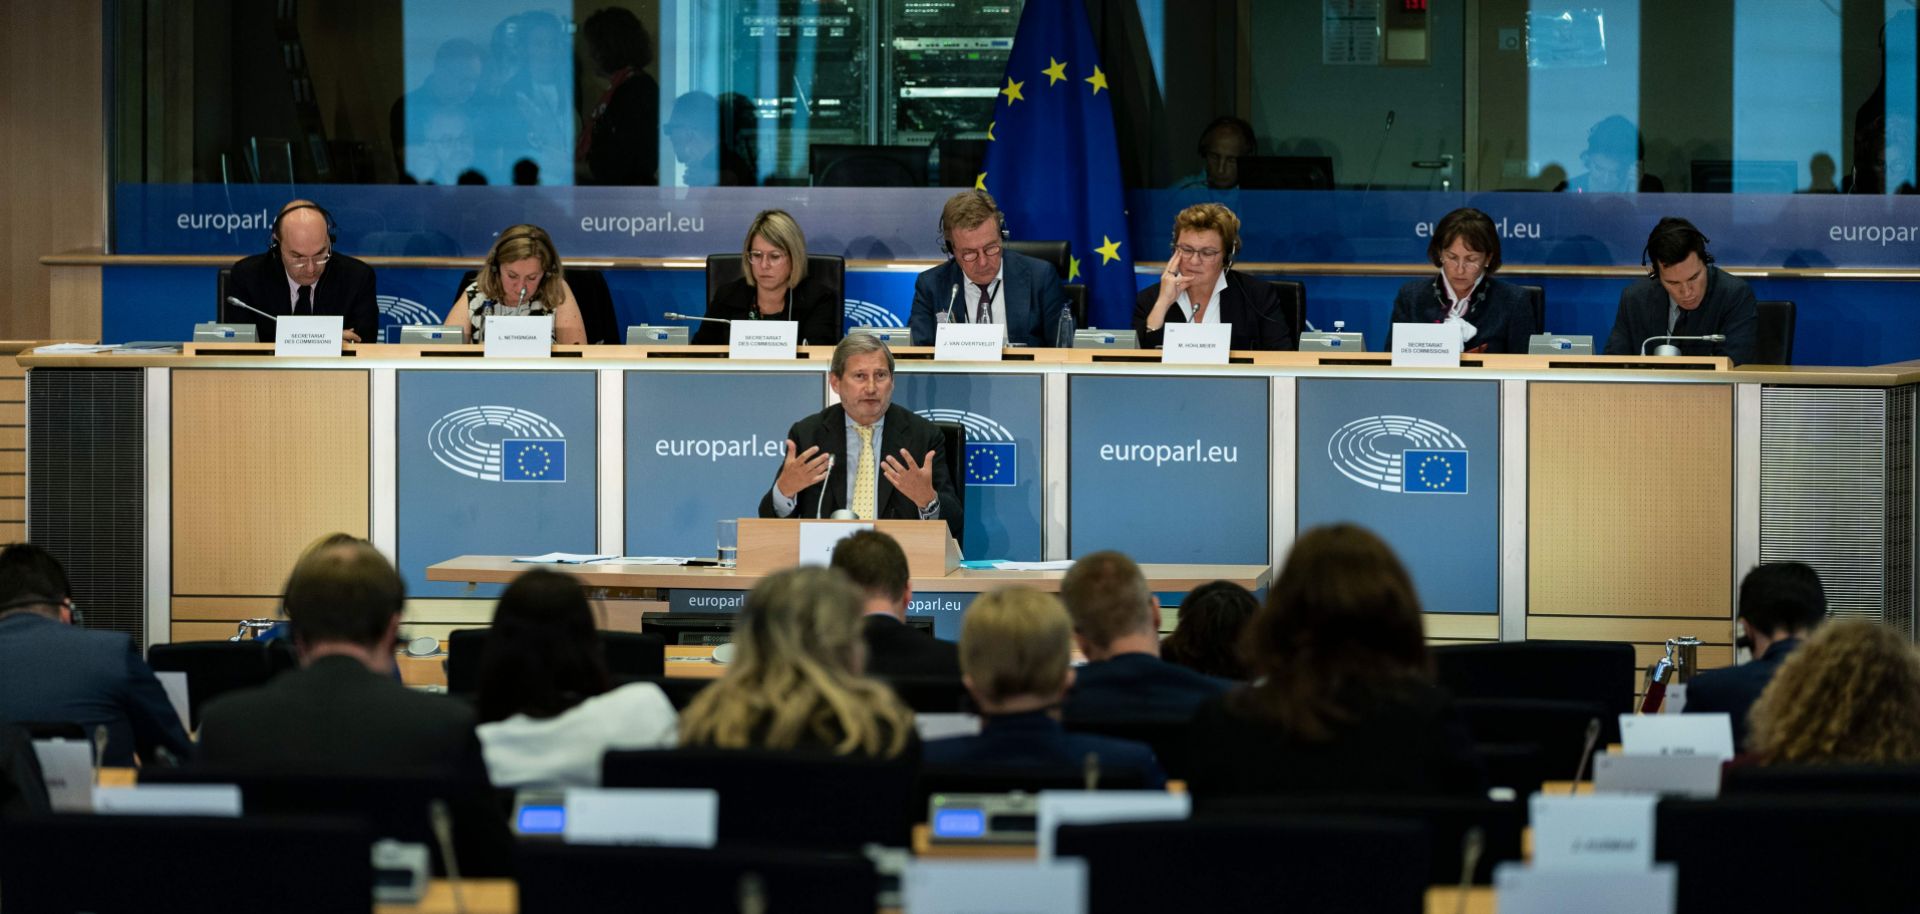 This photo shows Austria's Johannes Hahn, who is set to become the next EU budget commissioner, answering questions during a hearing of the European Parliament in Brussels on Oct. 3, 2019.